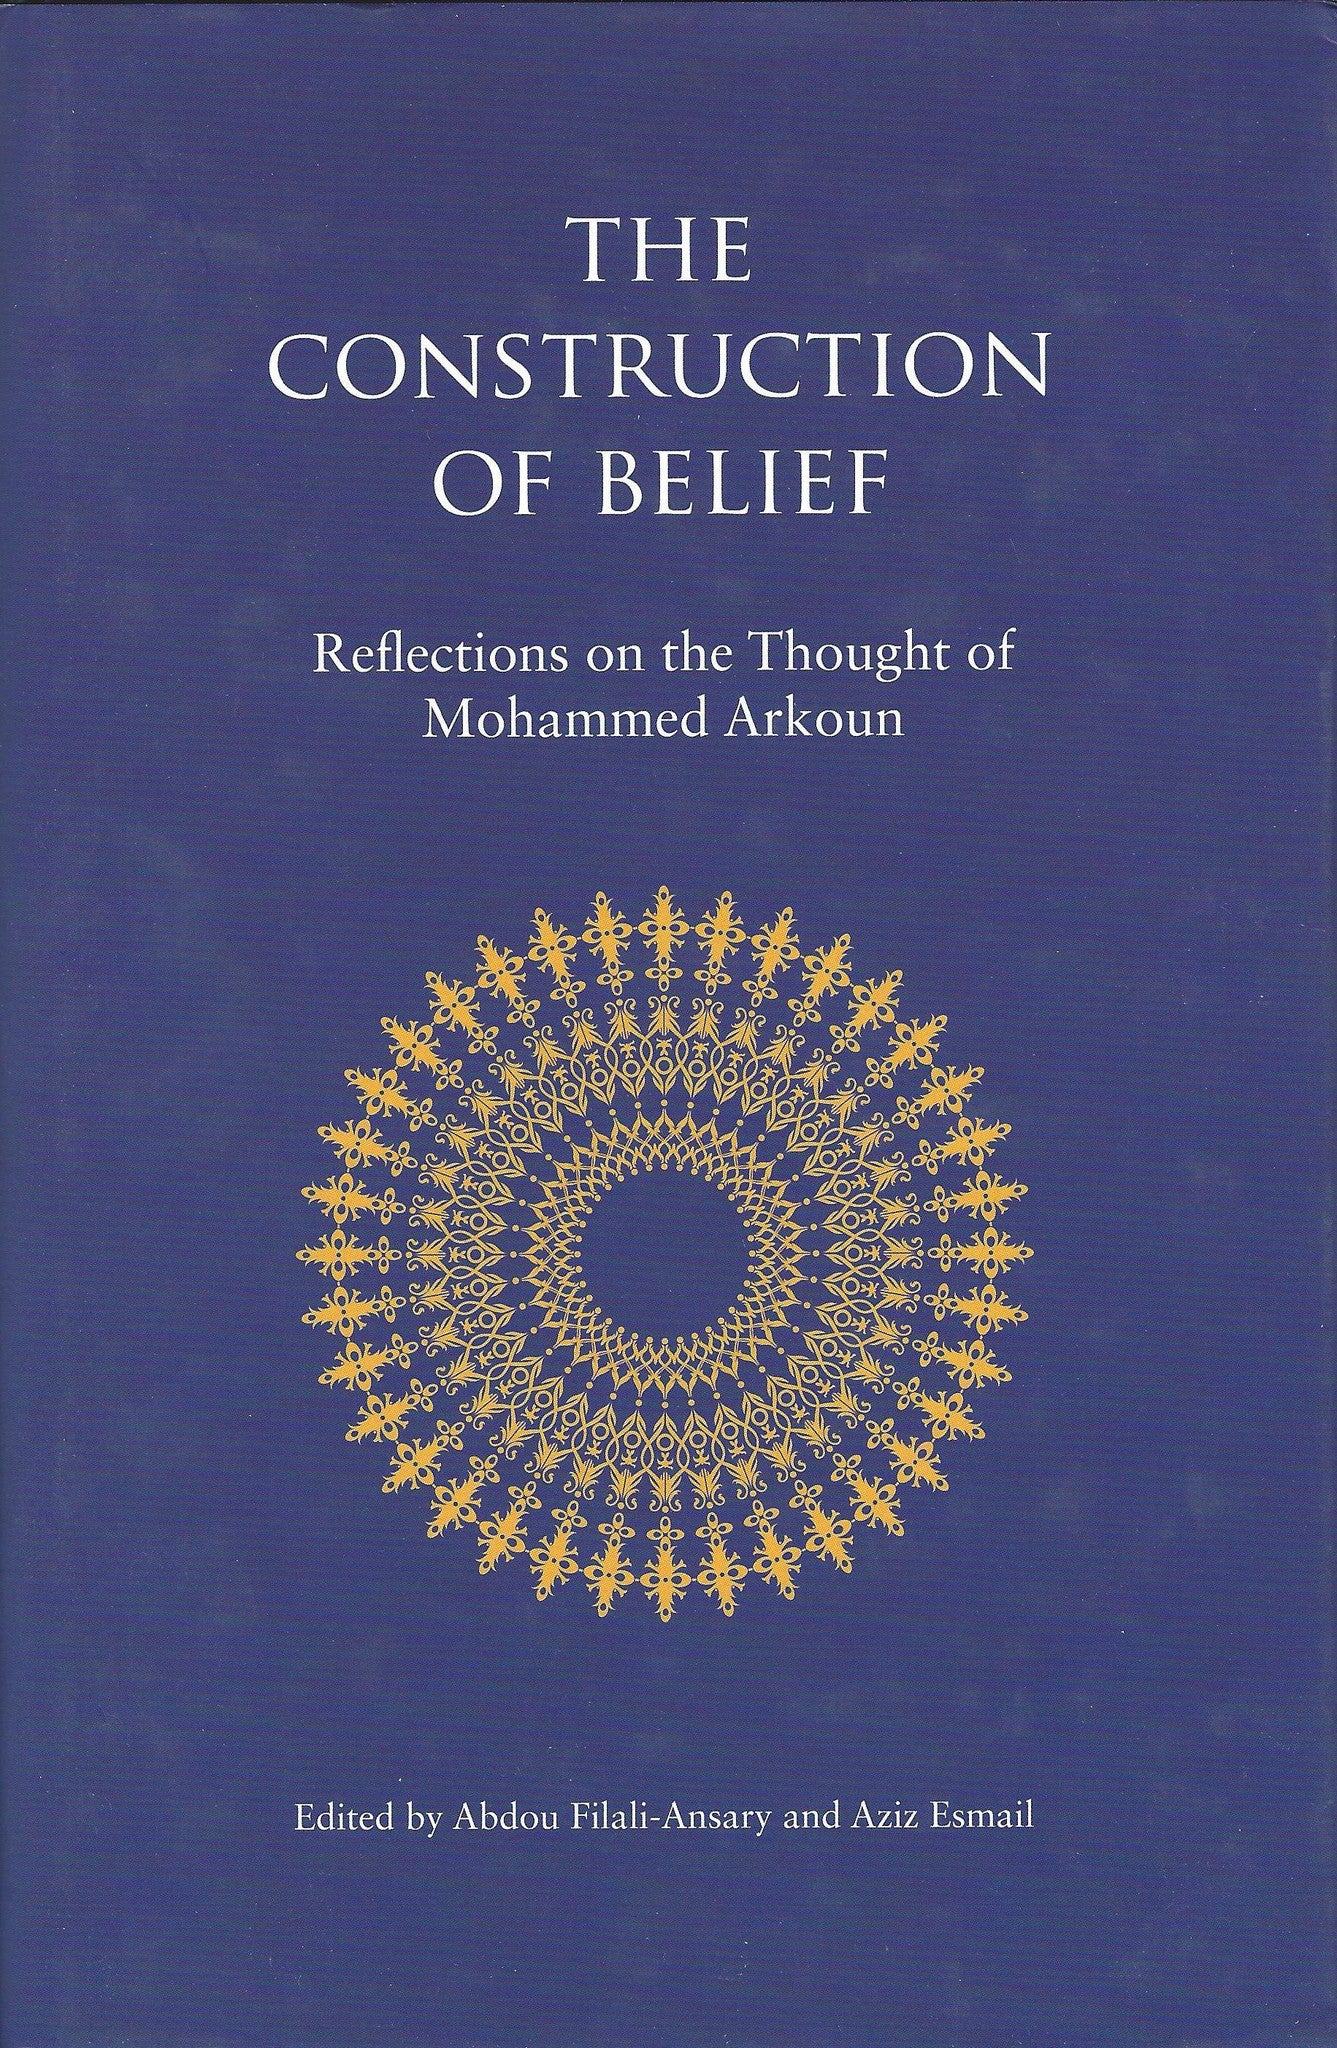 The Construction of Belief: Reflections on the Thought of Mohammed Arkoun , Book - Daybreak International Bookstore, Daybreak Press Global Bookshop
